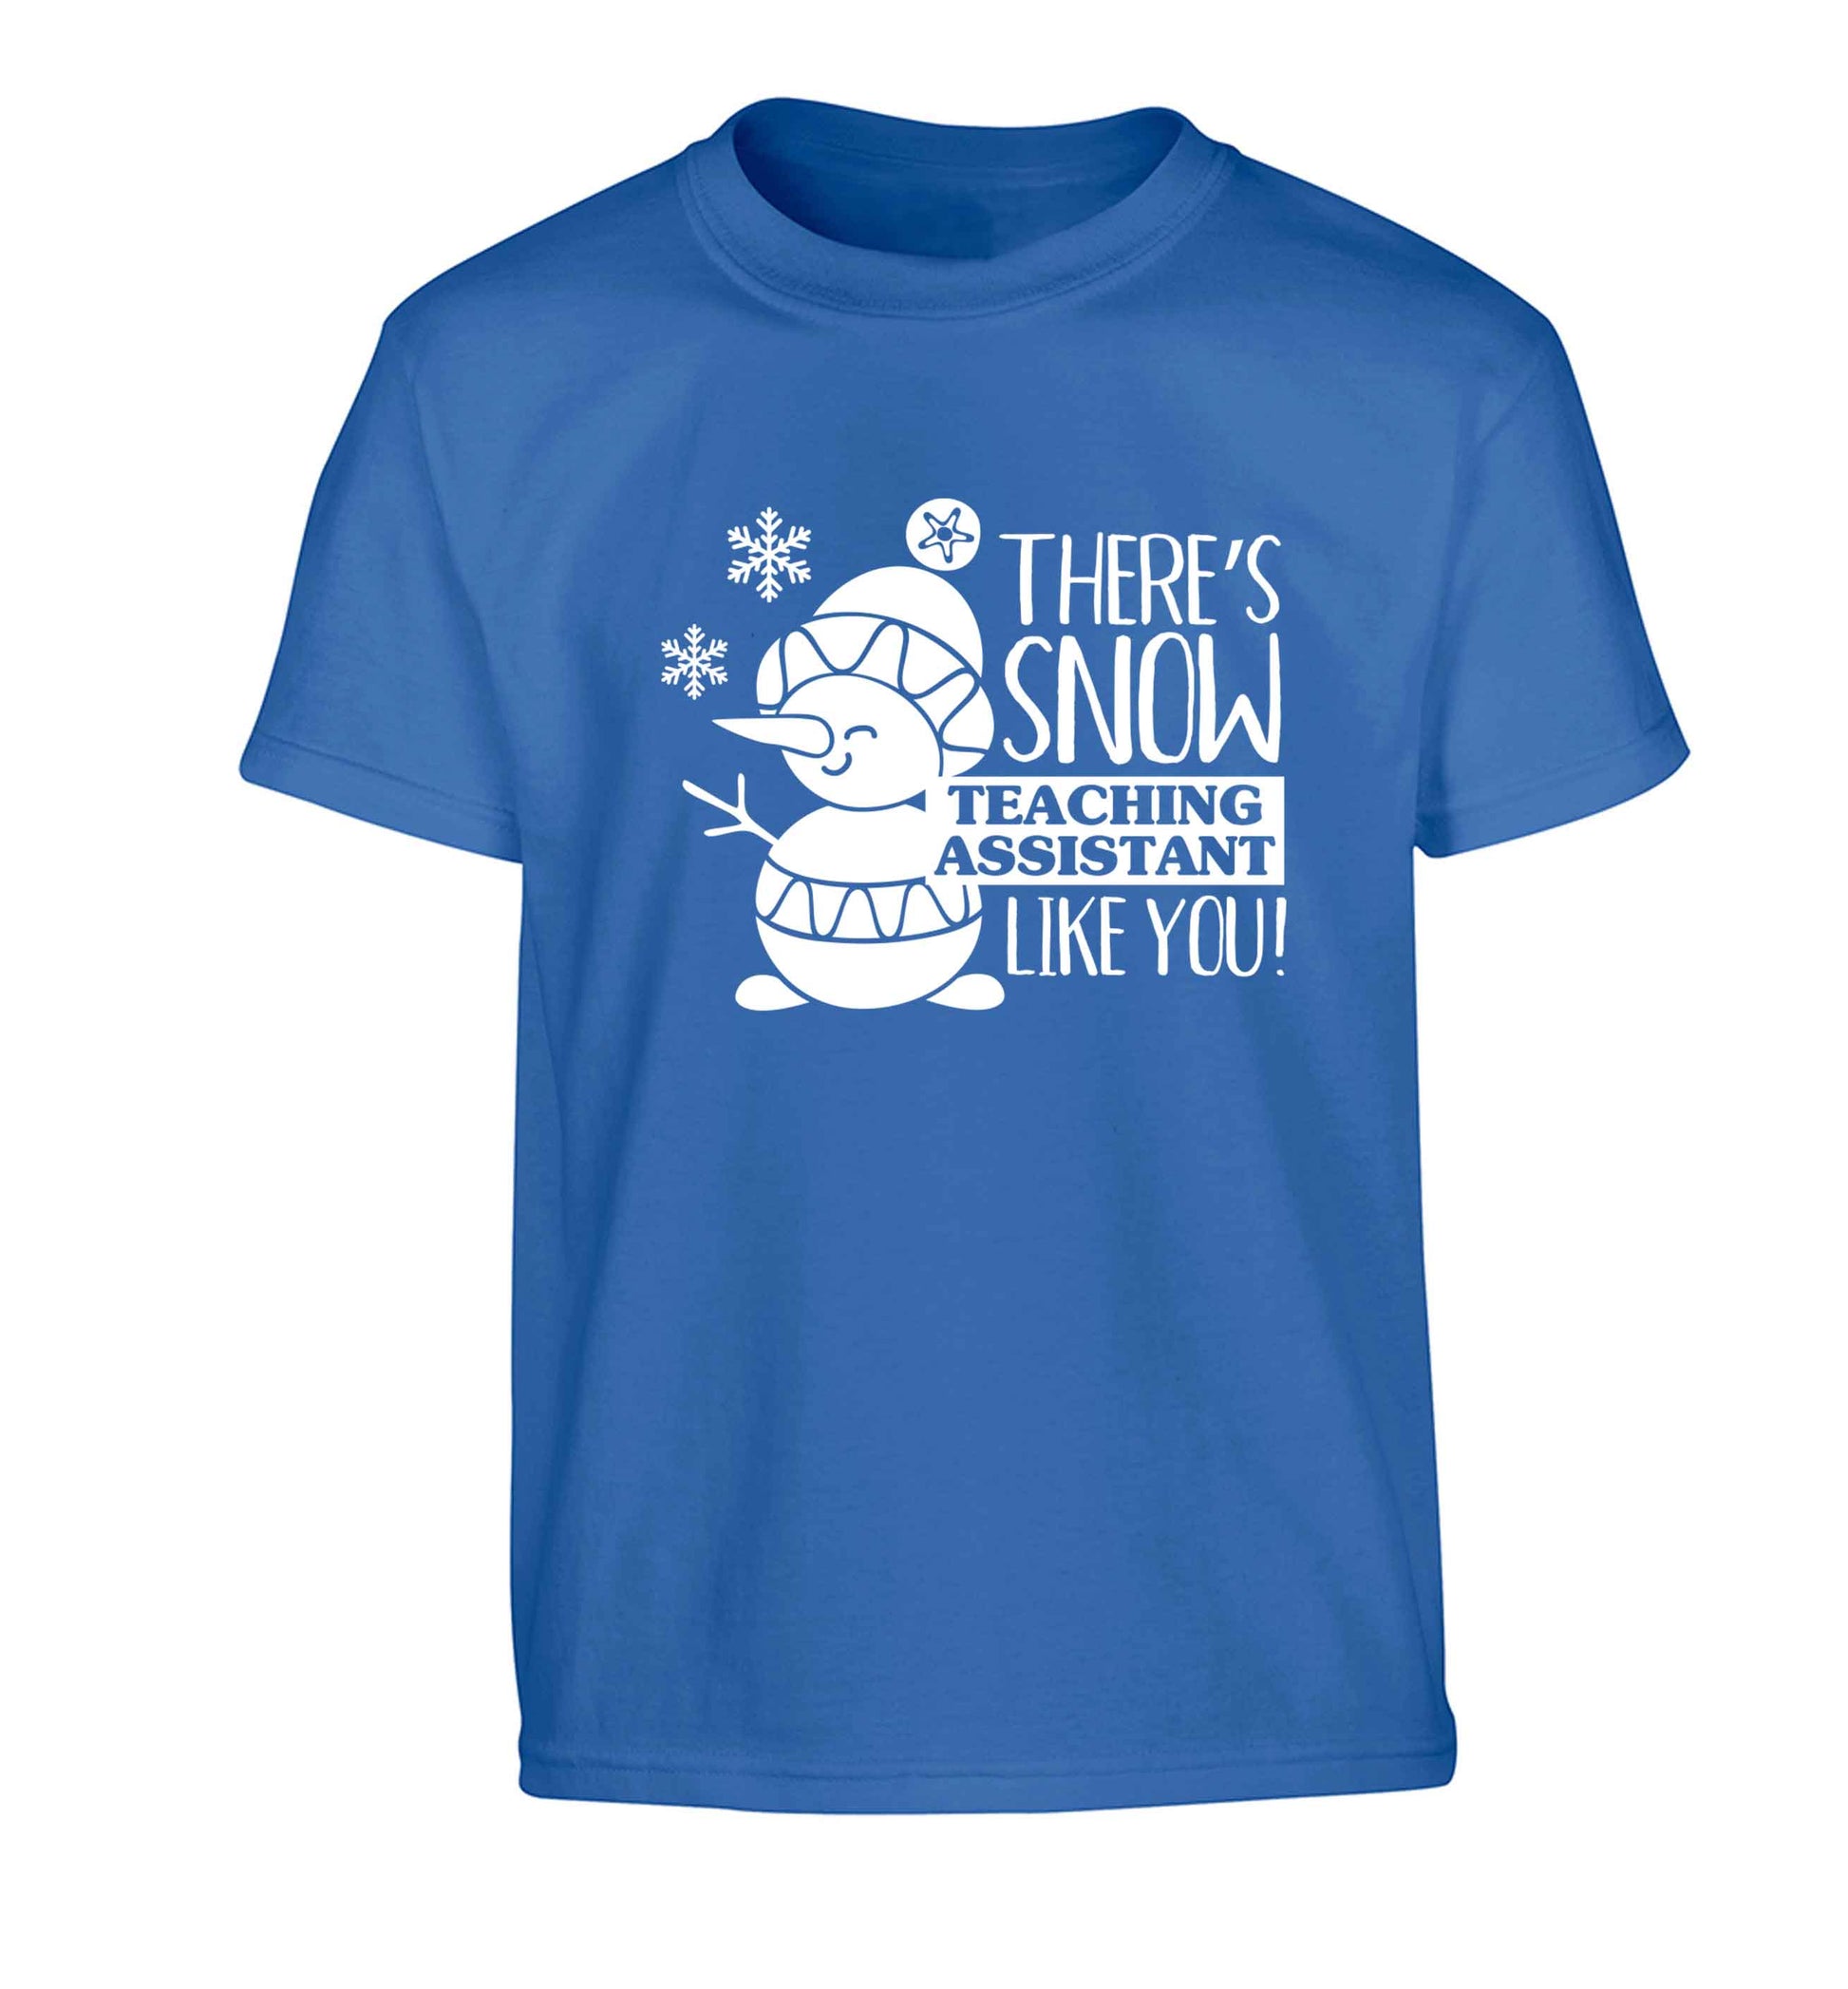 There's snow teaching assistant like you Children's blue Tshirt 12-13 Years